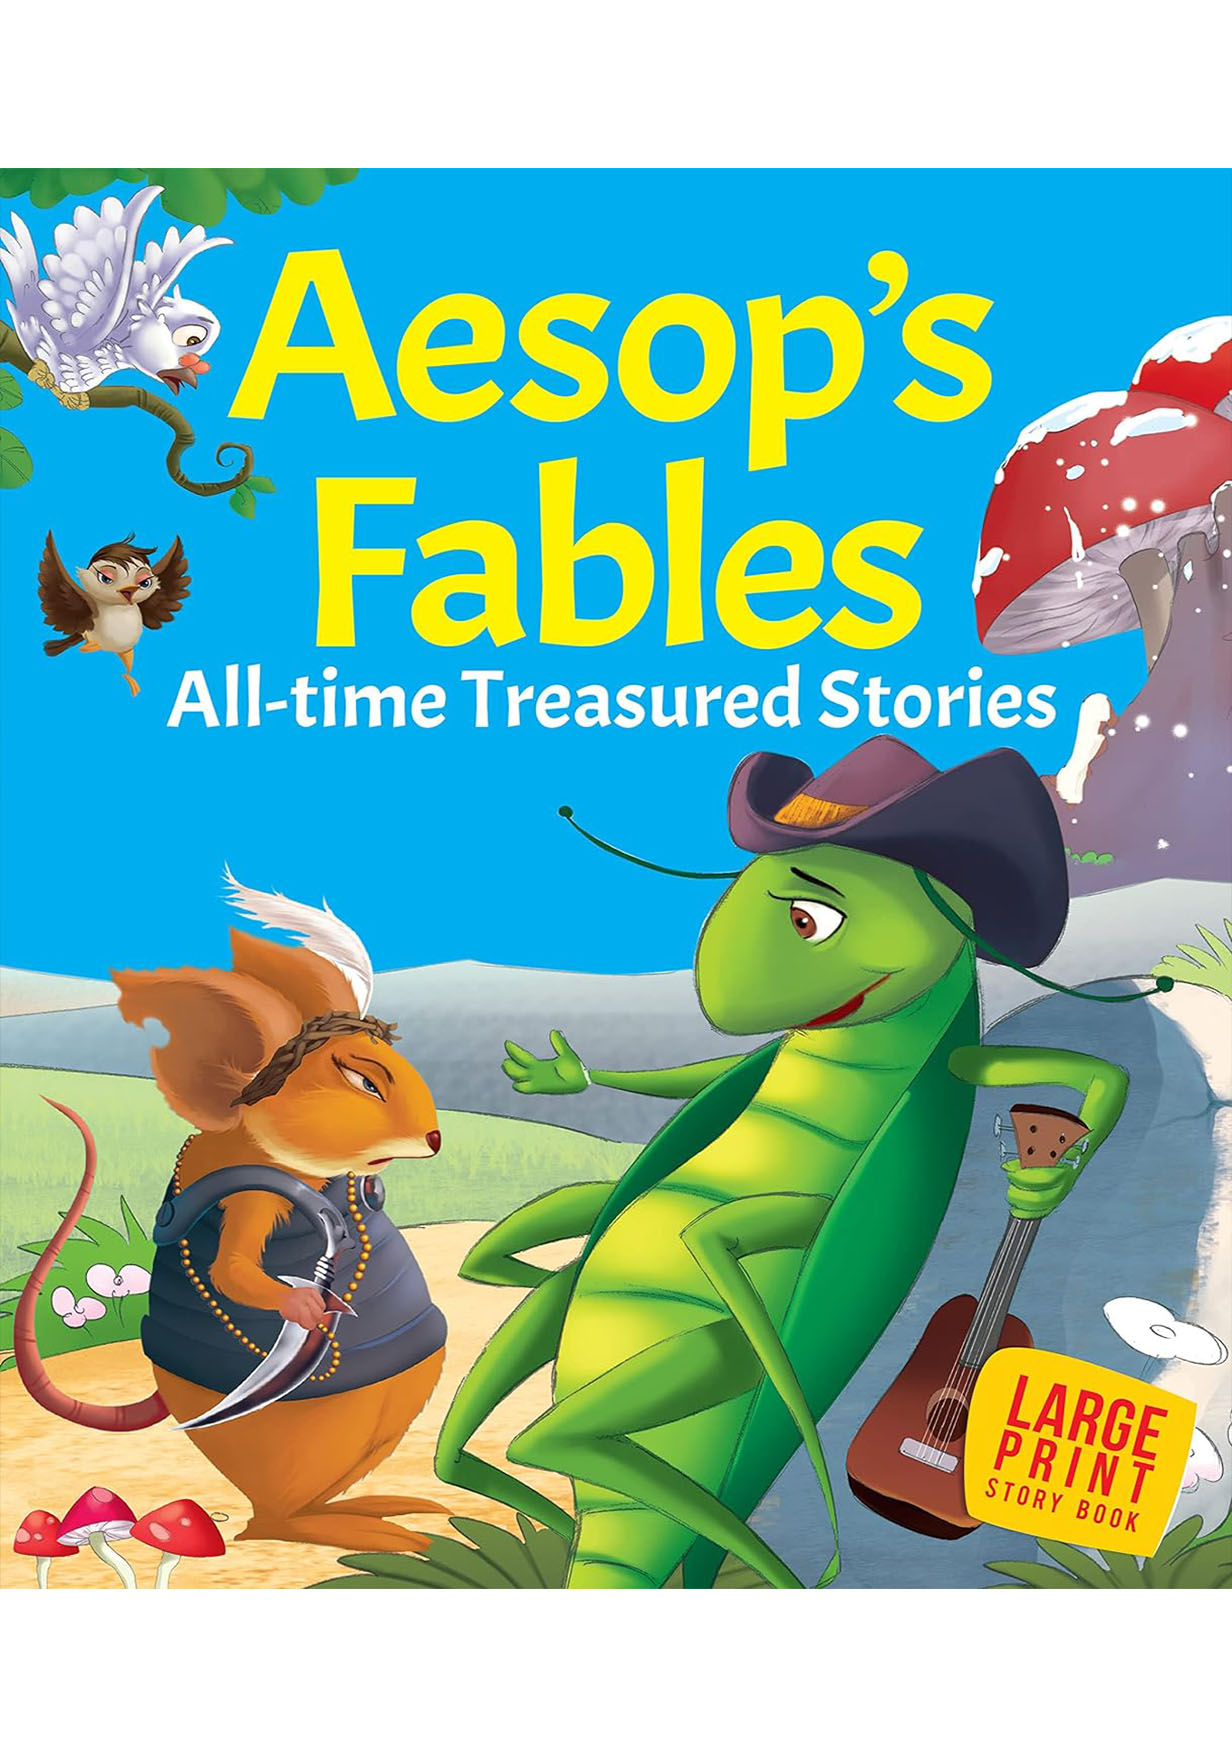 Aesops Fables All-time Treasured Stories (Large Print Story Book) (পেপারব্যাক)